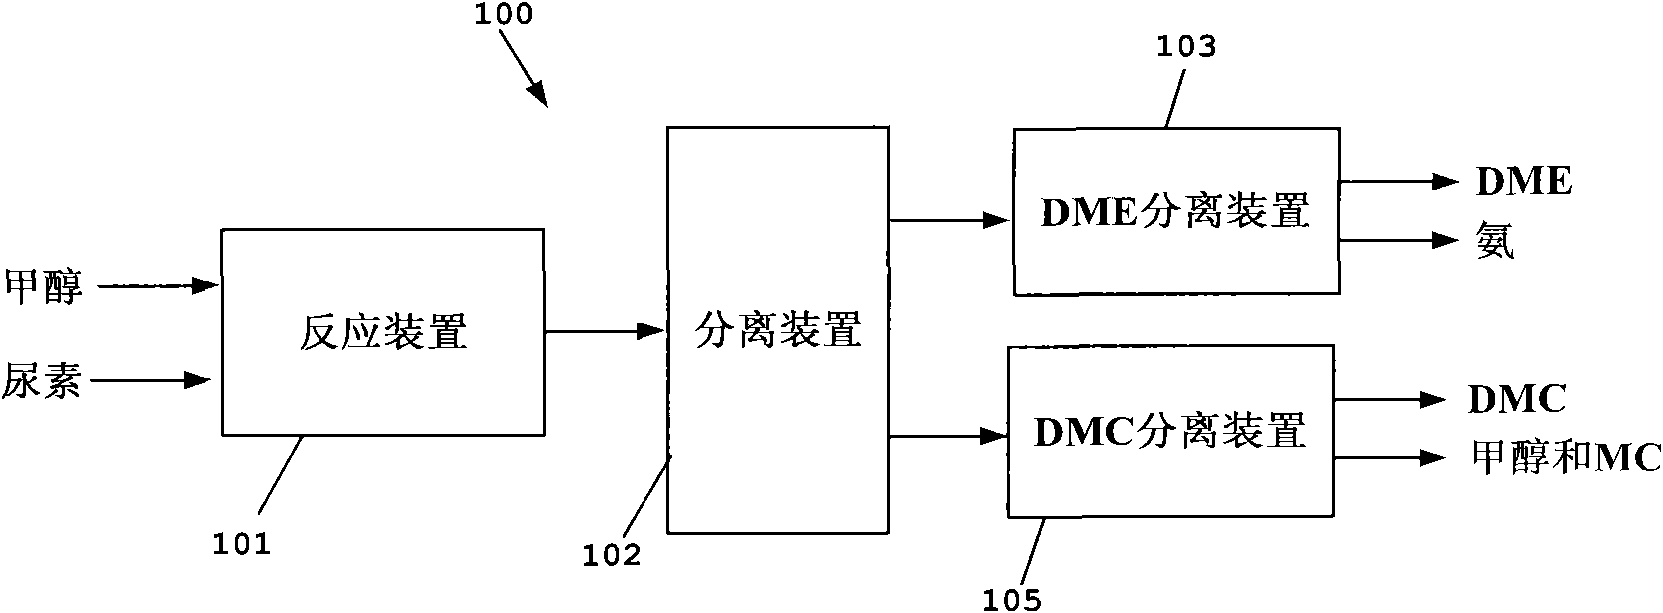 Process for co-producing dimethyl carbonate and dimethyl ether by urea alcoholysis method